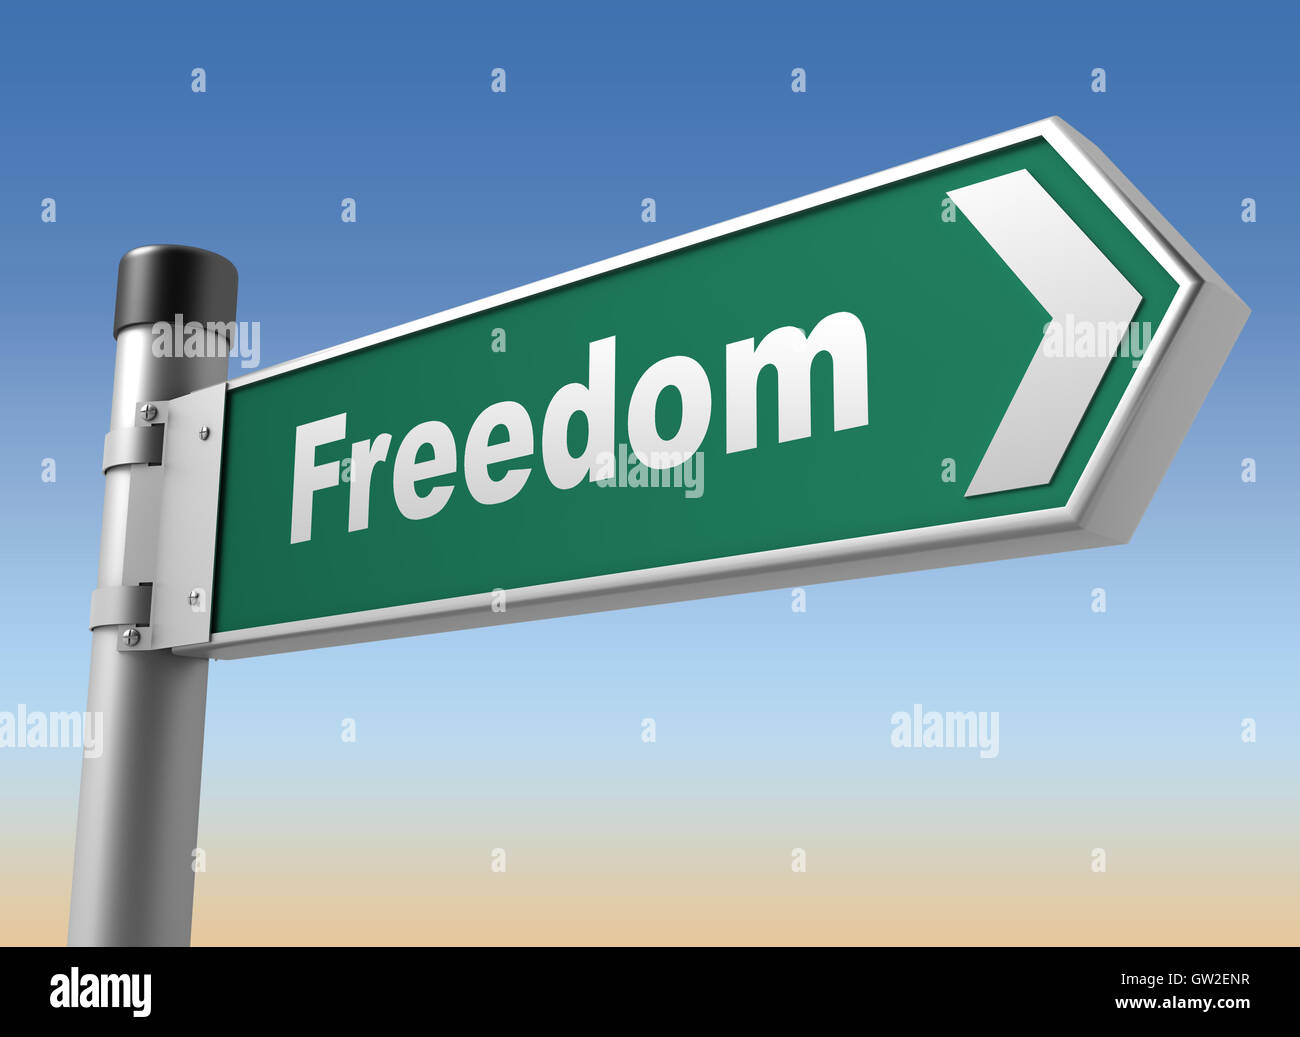 freedom road sign 3d illustration Stock Photo